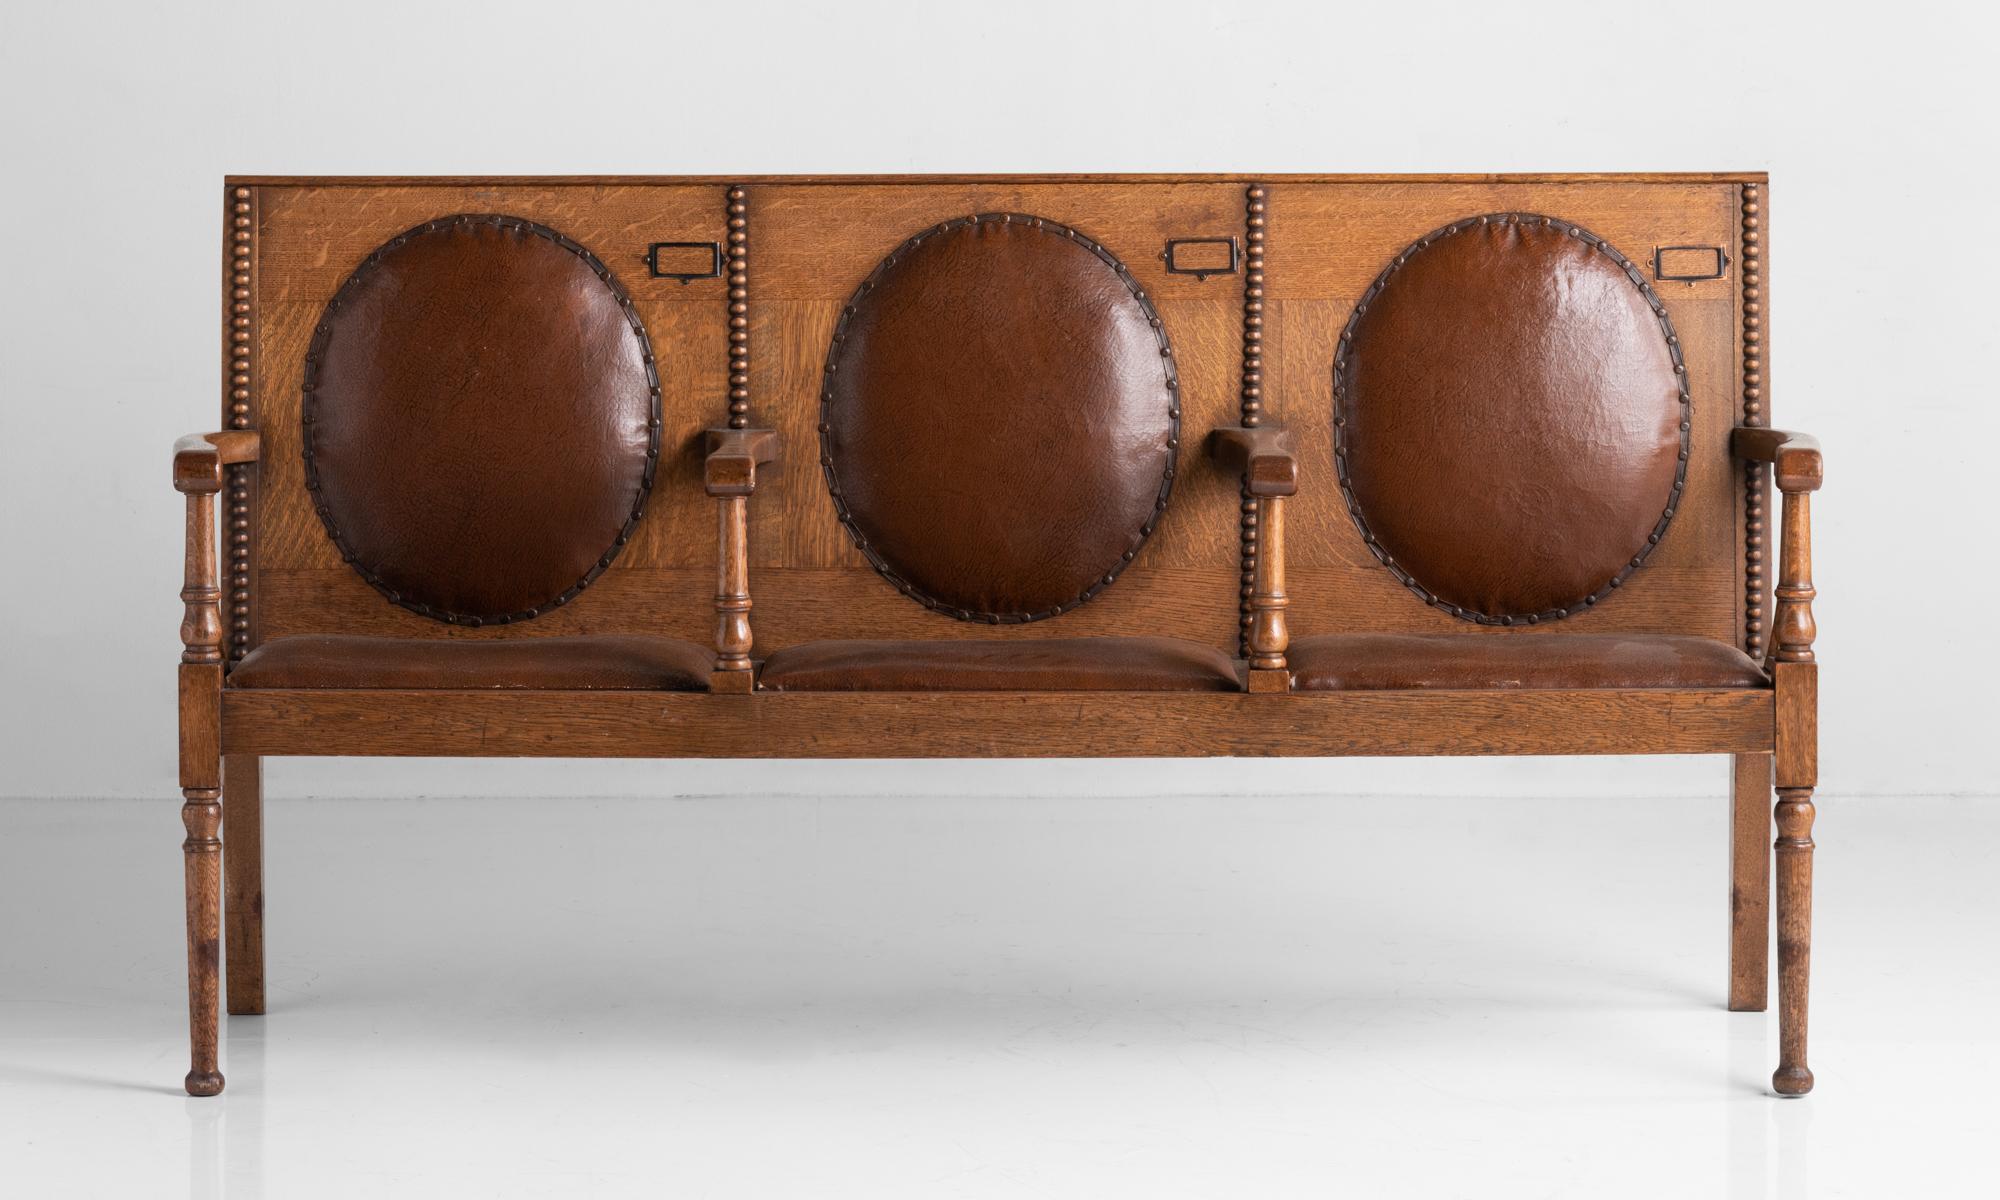 Oak and leather settle, Scotland, circa 1900

Solid oak construction with leather upholstered backs, originally from a synagogue.